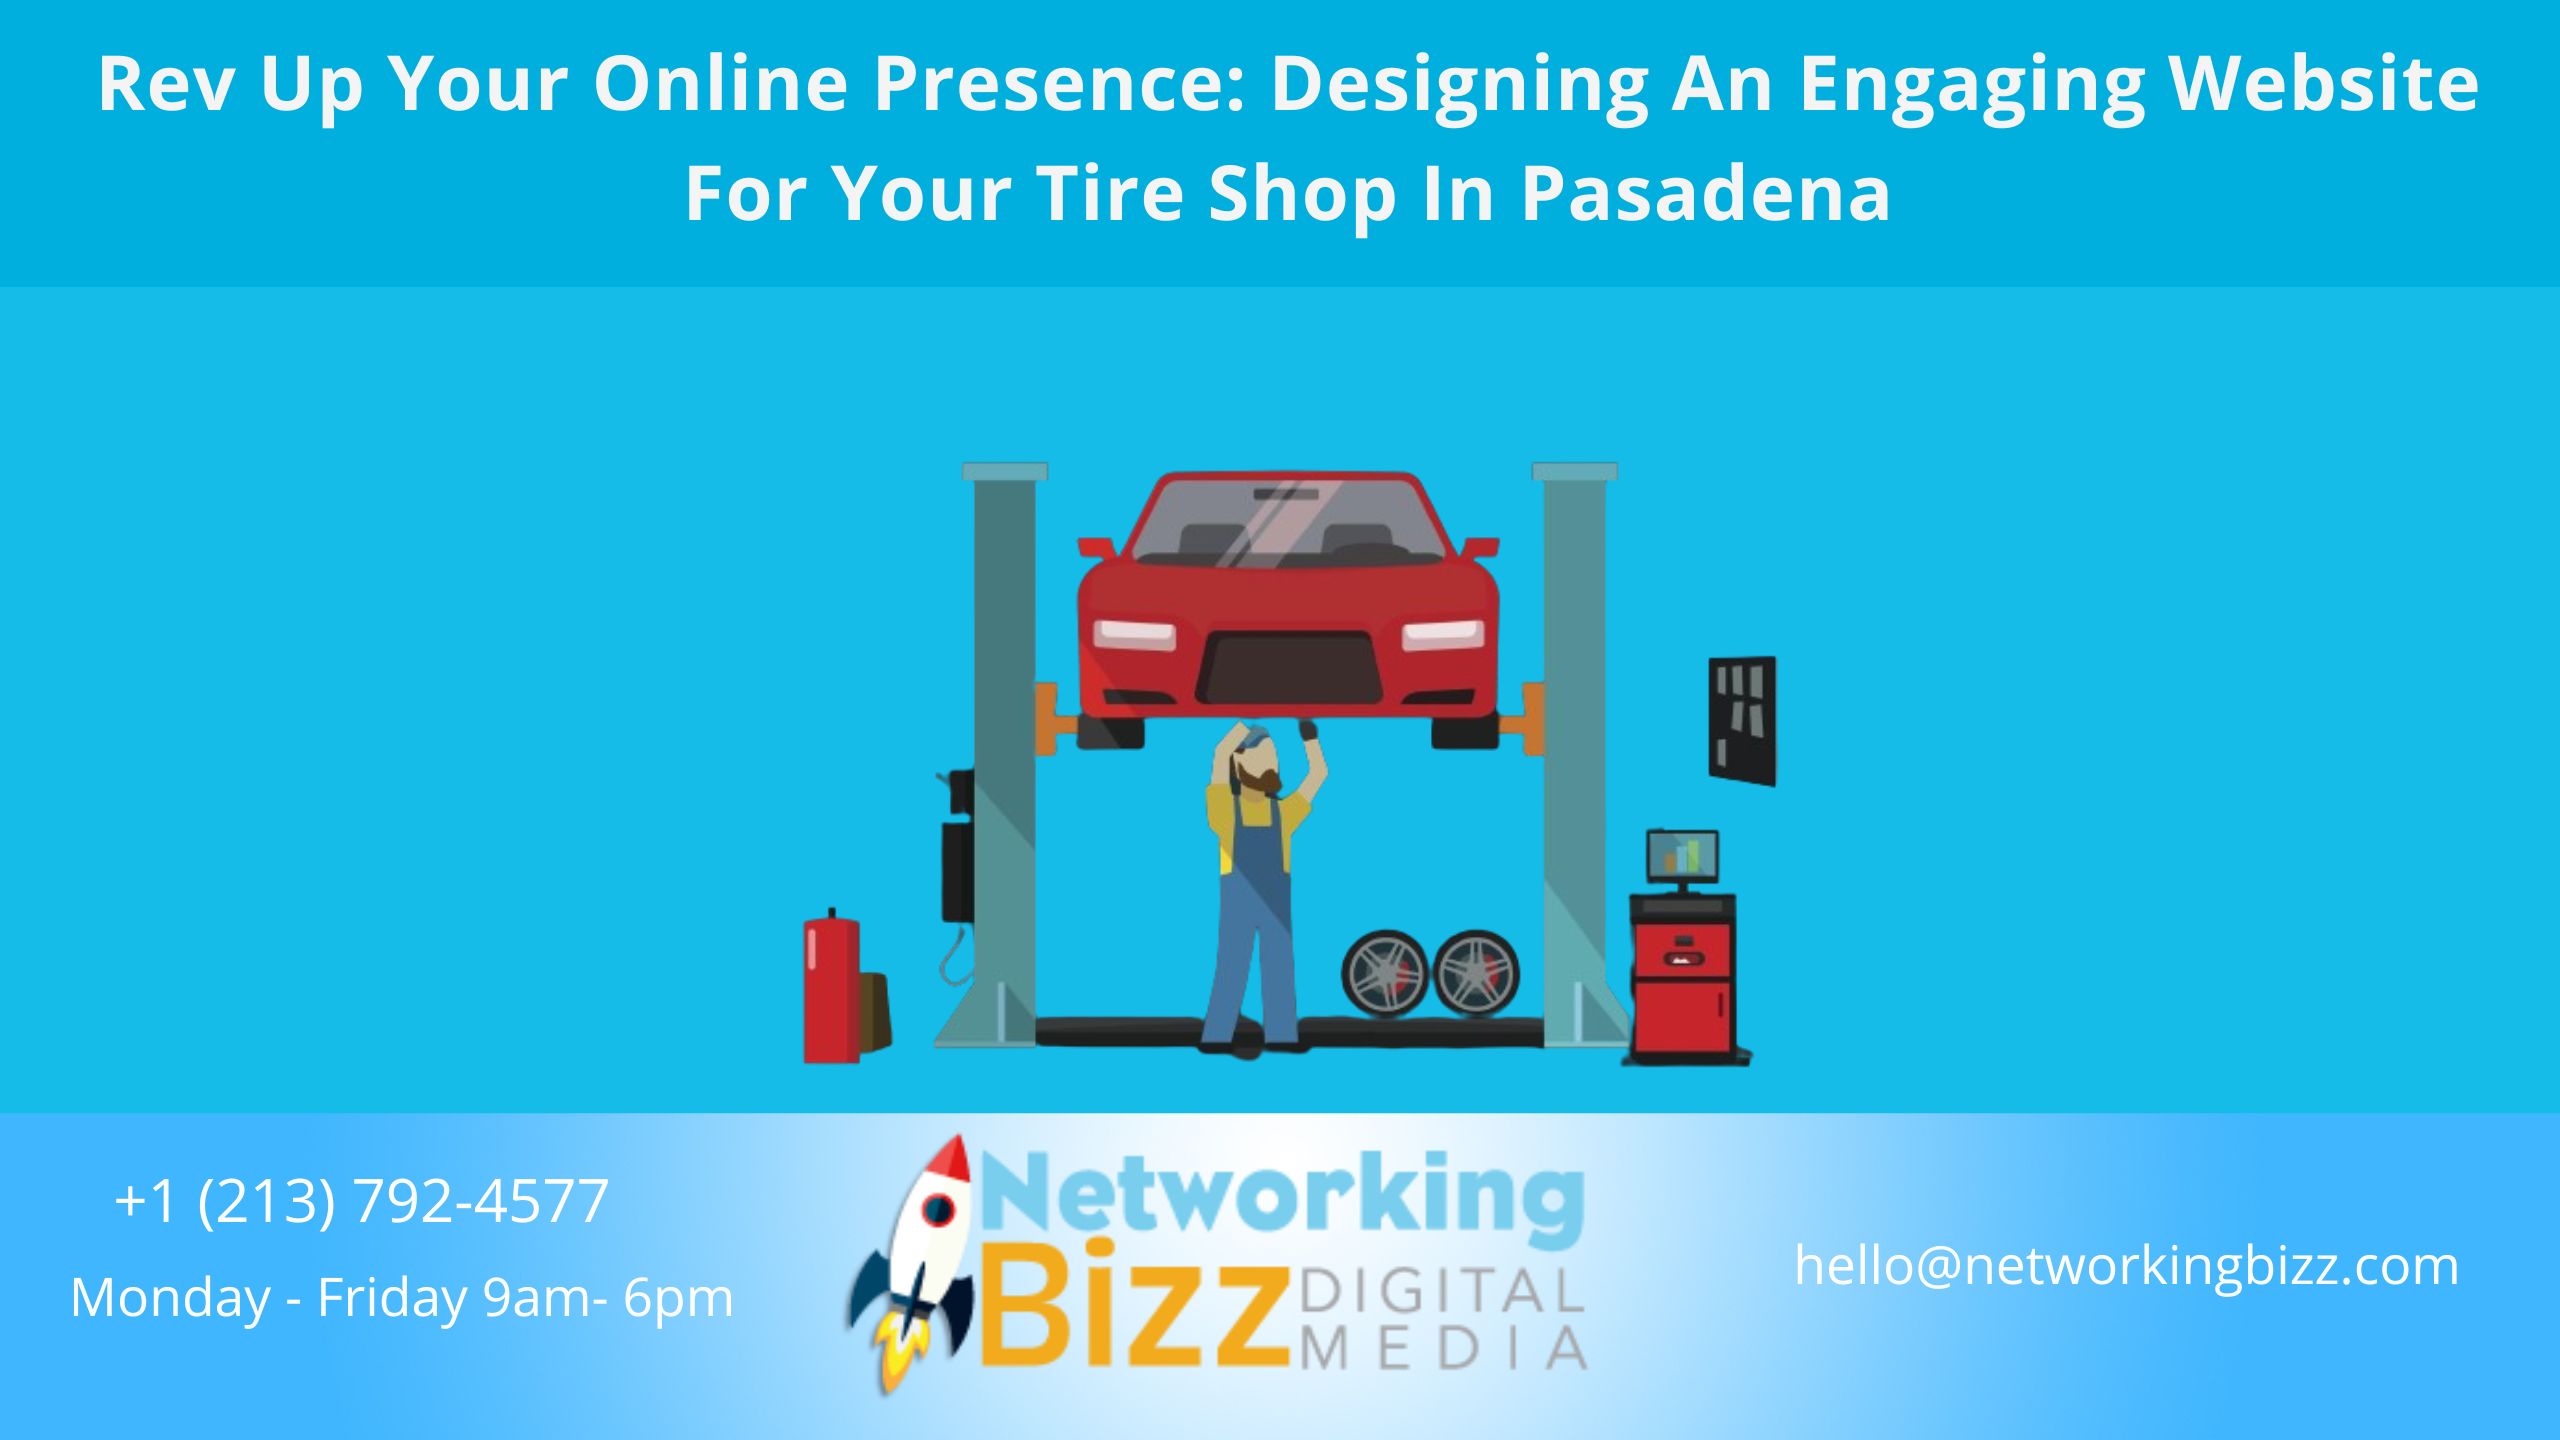 Rev Up Your Online Presence: Designing An Engaging Website For Your Tire Shop In Pasadena